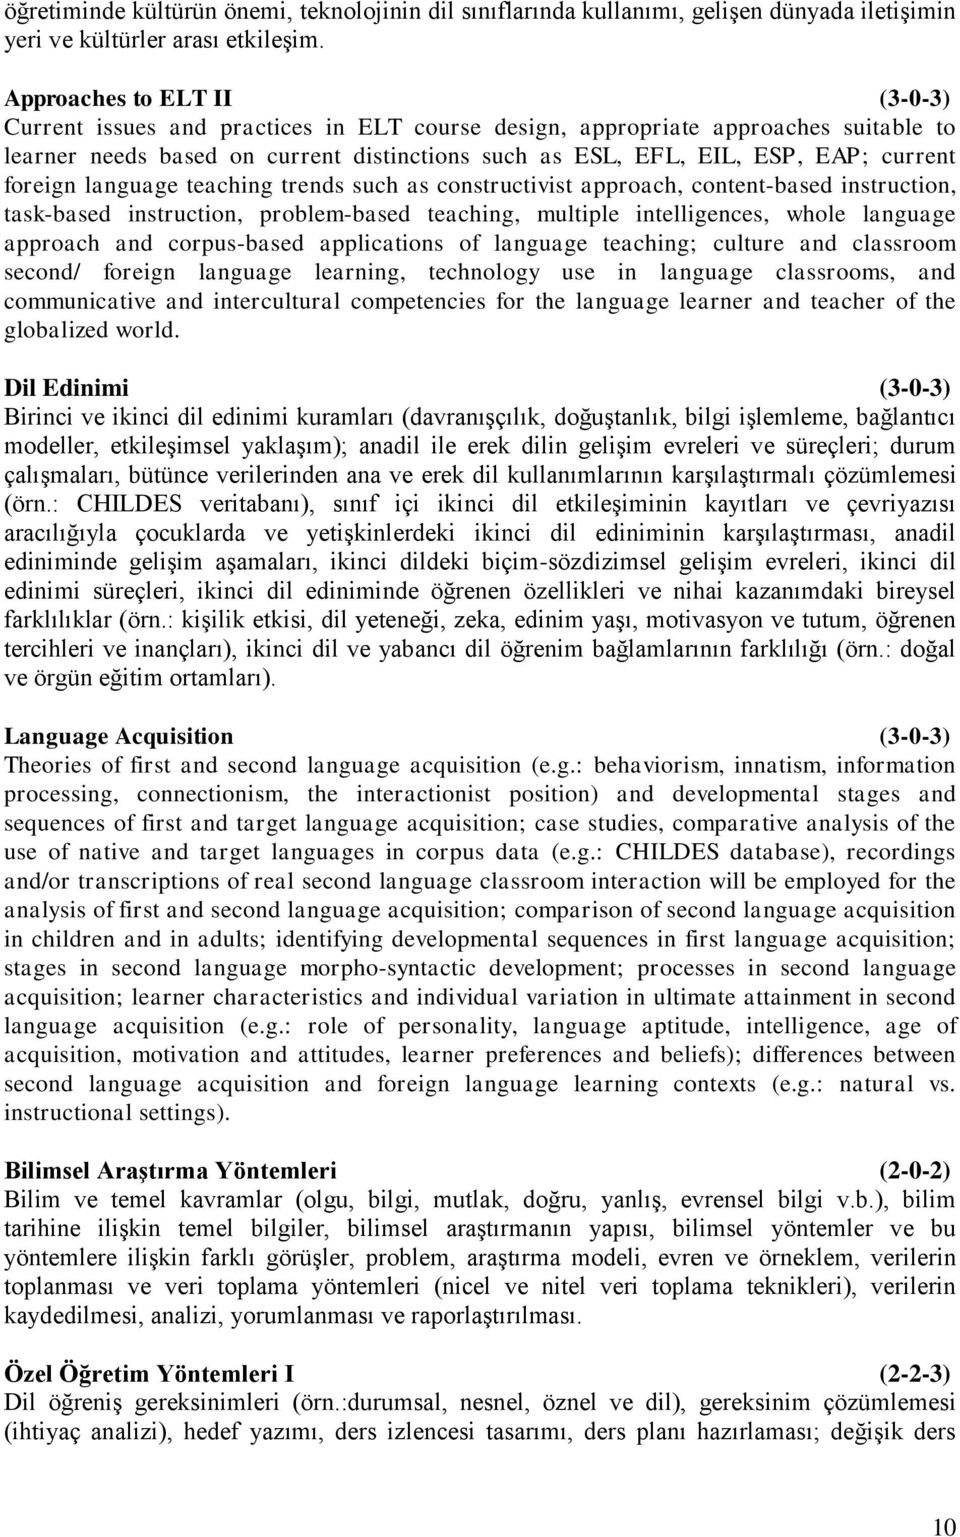 foreign language teaching trends such as constructivist approach, content-based instruction, task-based instruction, problem-based teaching, multiple intelligences, whole language approach and